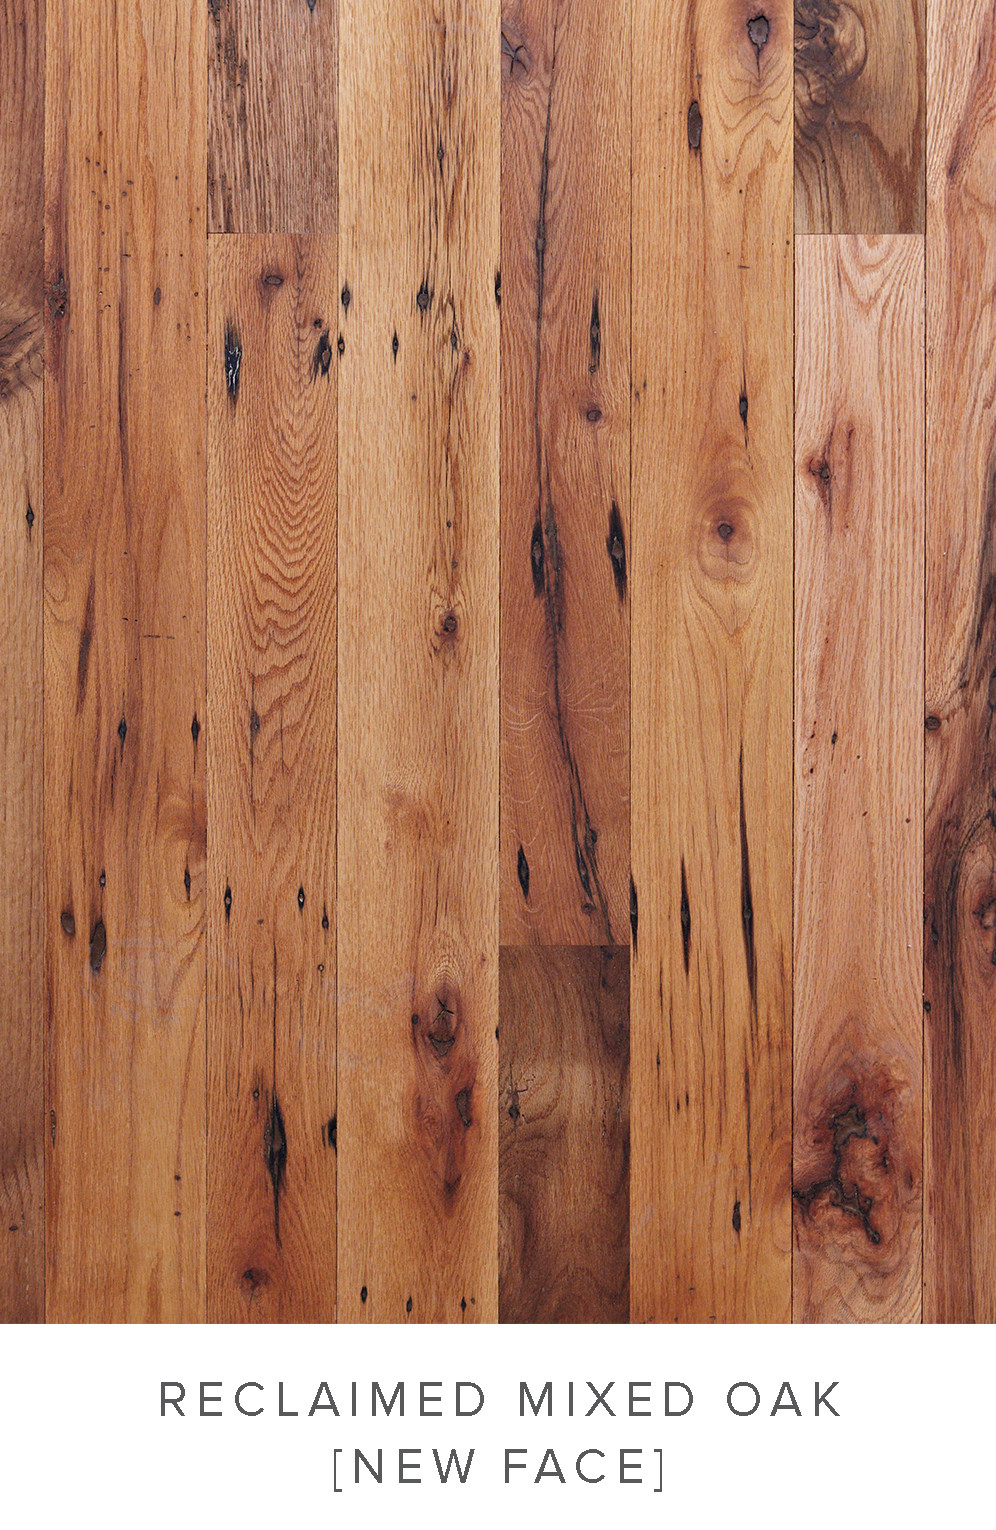 16 Cute Hardwood Flooring Stores Near Me 2024 free download hardwood flooring stores near me of extensive range of reclaimed wood flooring all under one roof at the regarding reclaimed mixed oak new face